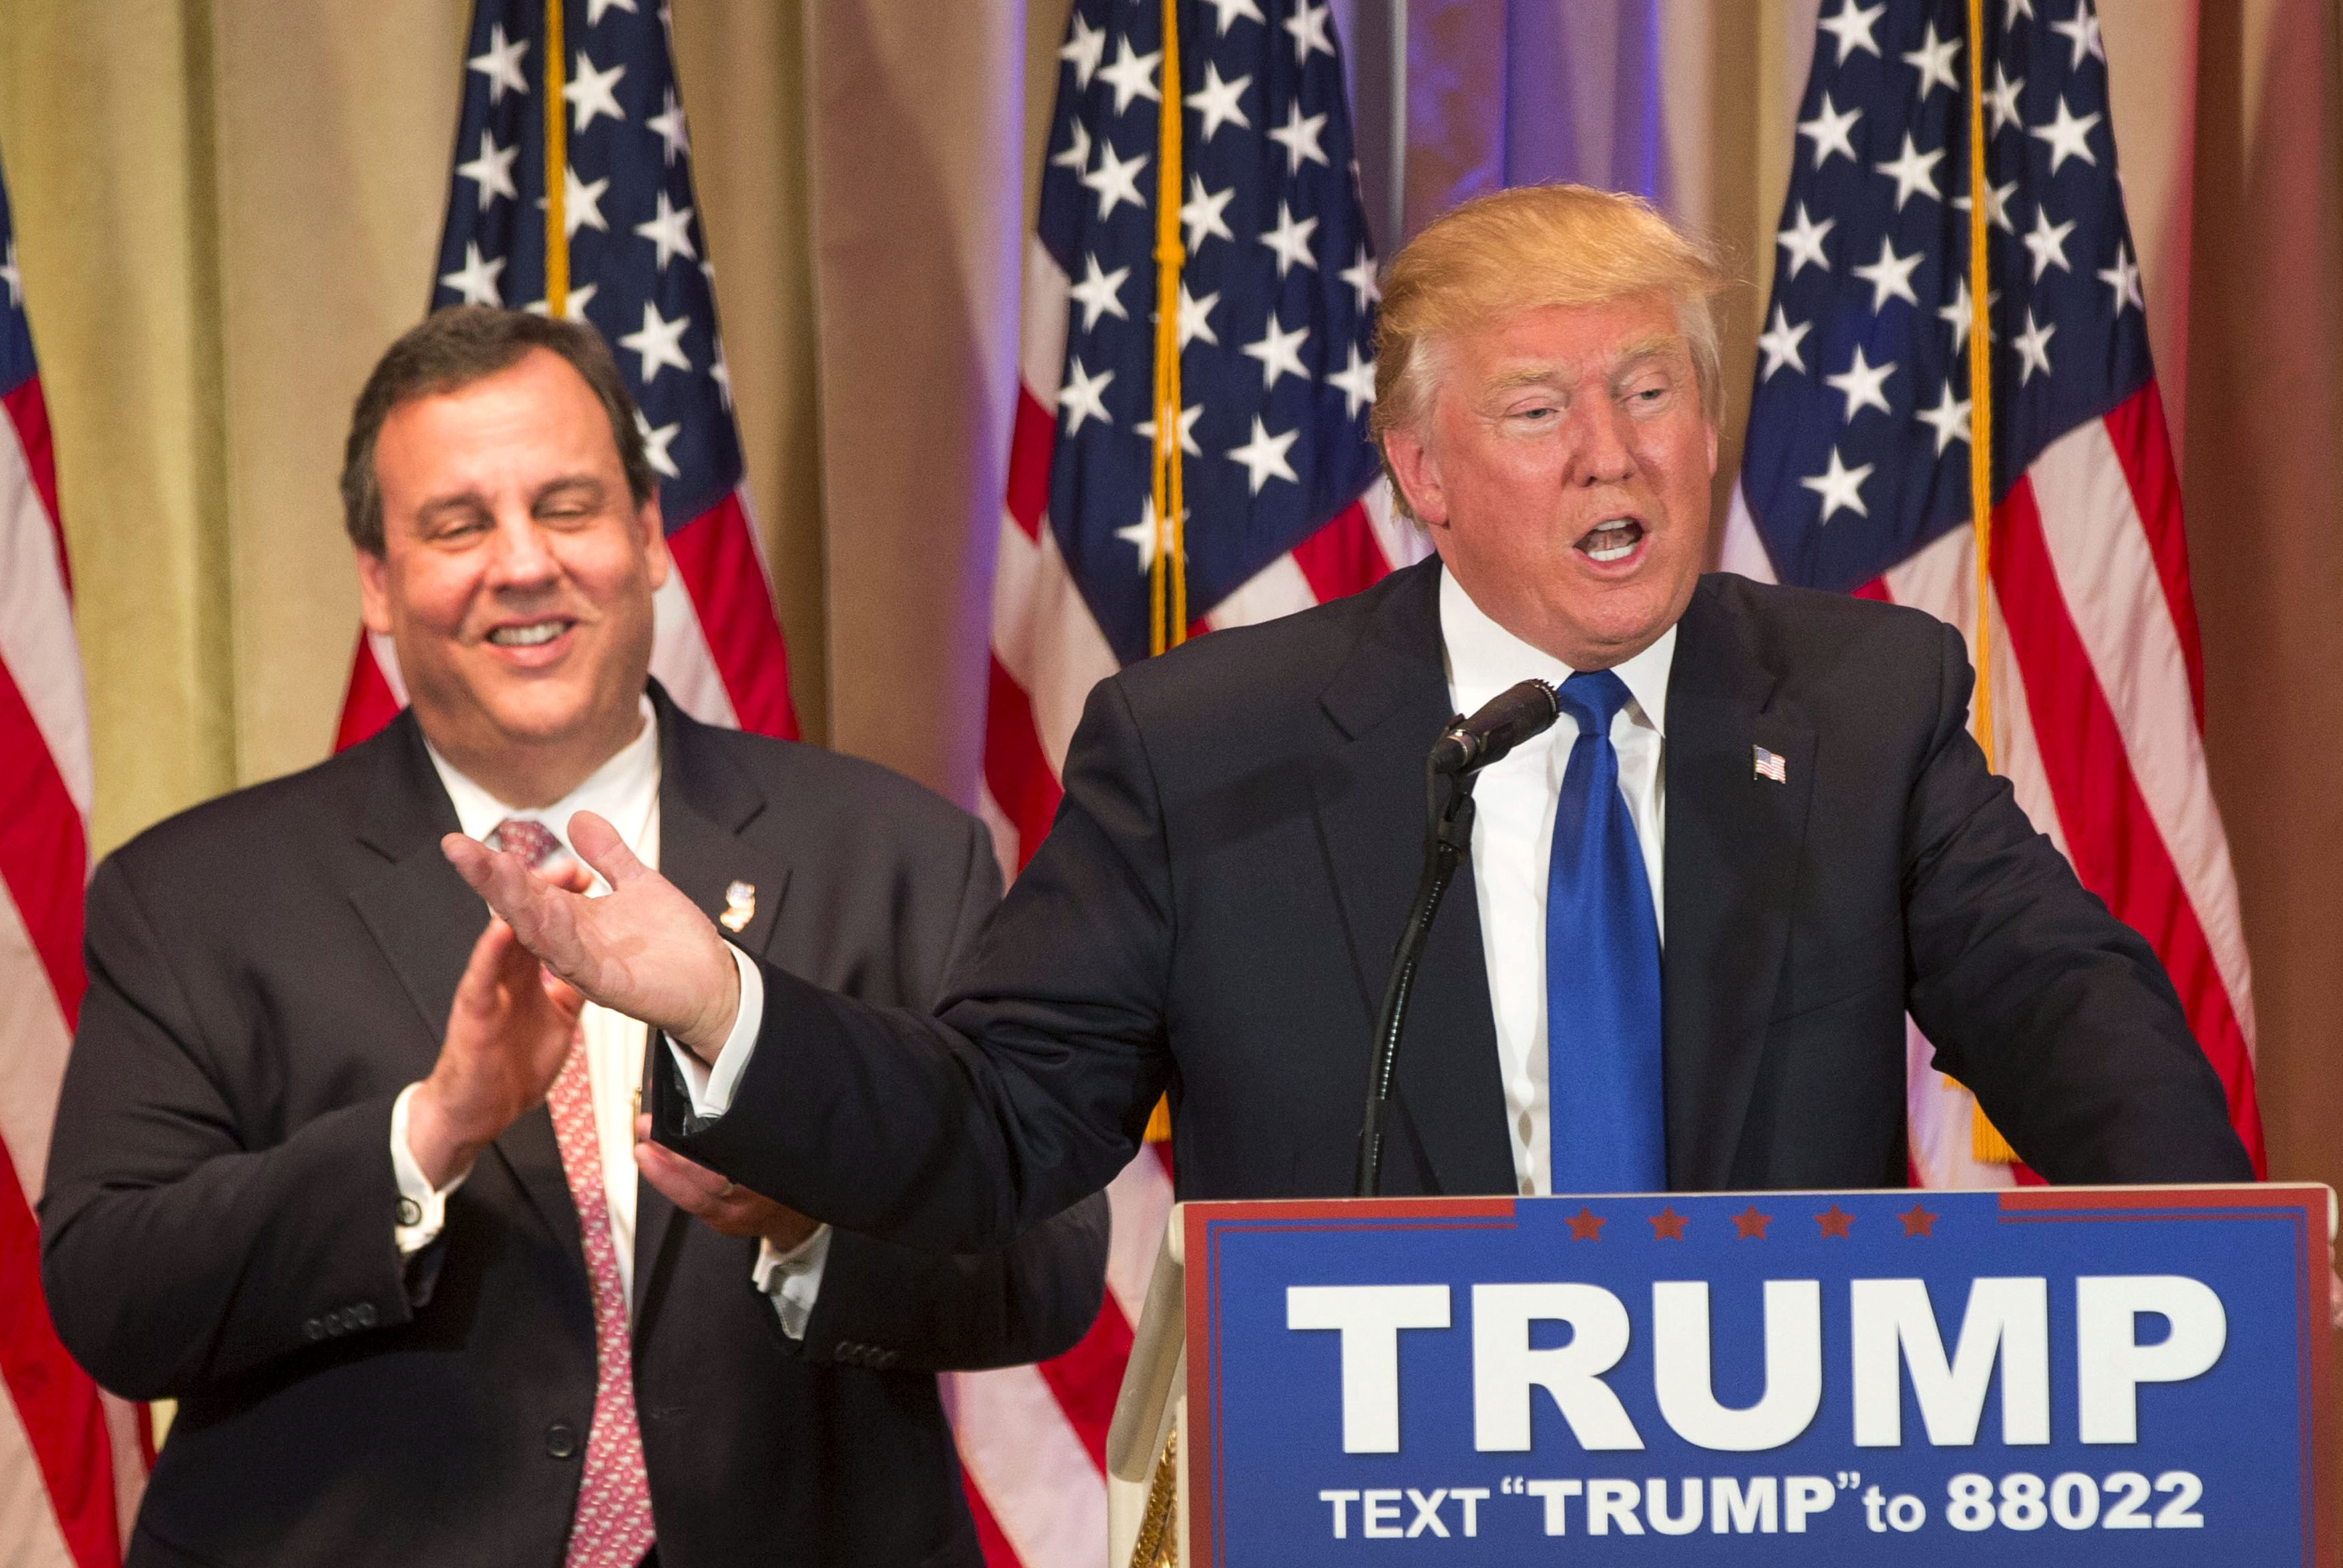 Republican 2016 US presidential candidate businessman Donald Trump (R) speaks, after being introduced by New Jersey Governor Chris Christie (L) at a Super Tuesday campaign event in Palm Beach, Florida, USA, 01 March 2016. The Florida presidential primary is 15 March 2016. EPA/RYAN STONE (RYAN STONE—)